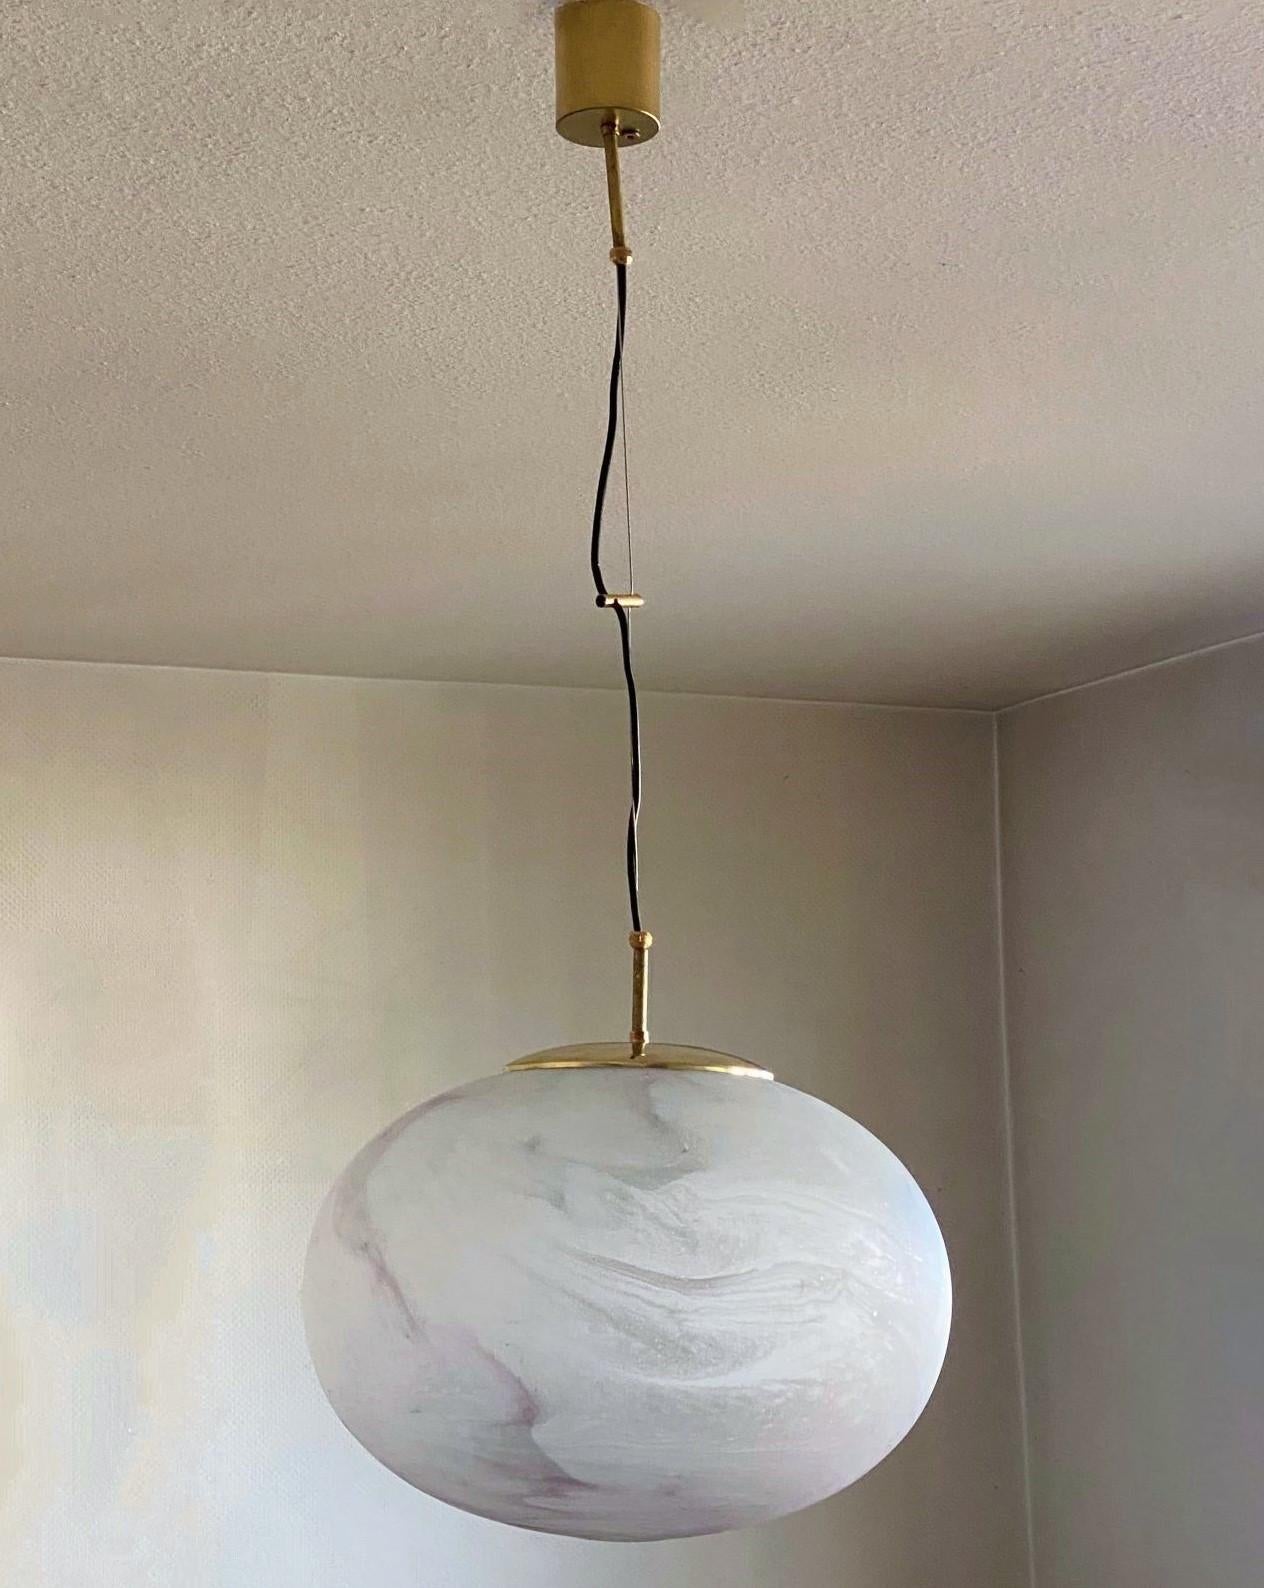 Mid-Century handblown Murano glass suspension pendant with brass mounts, atributed to Stilnovo, Italy, 1960s. Unique as hand-blown glass piece, the glass globe presents a color game of pale pink and gray shades creating all over its surface looking